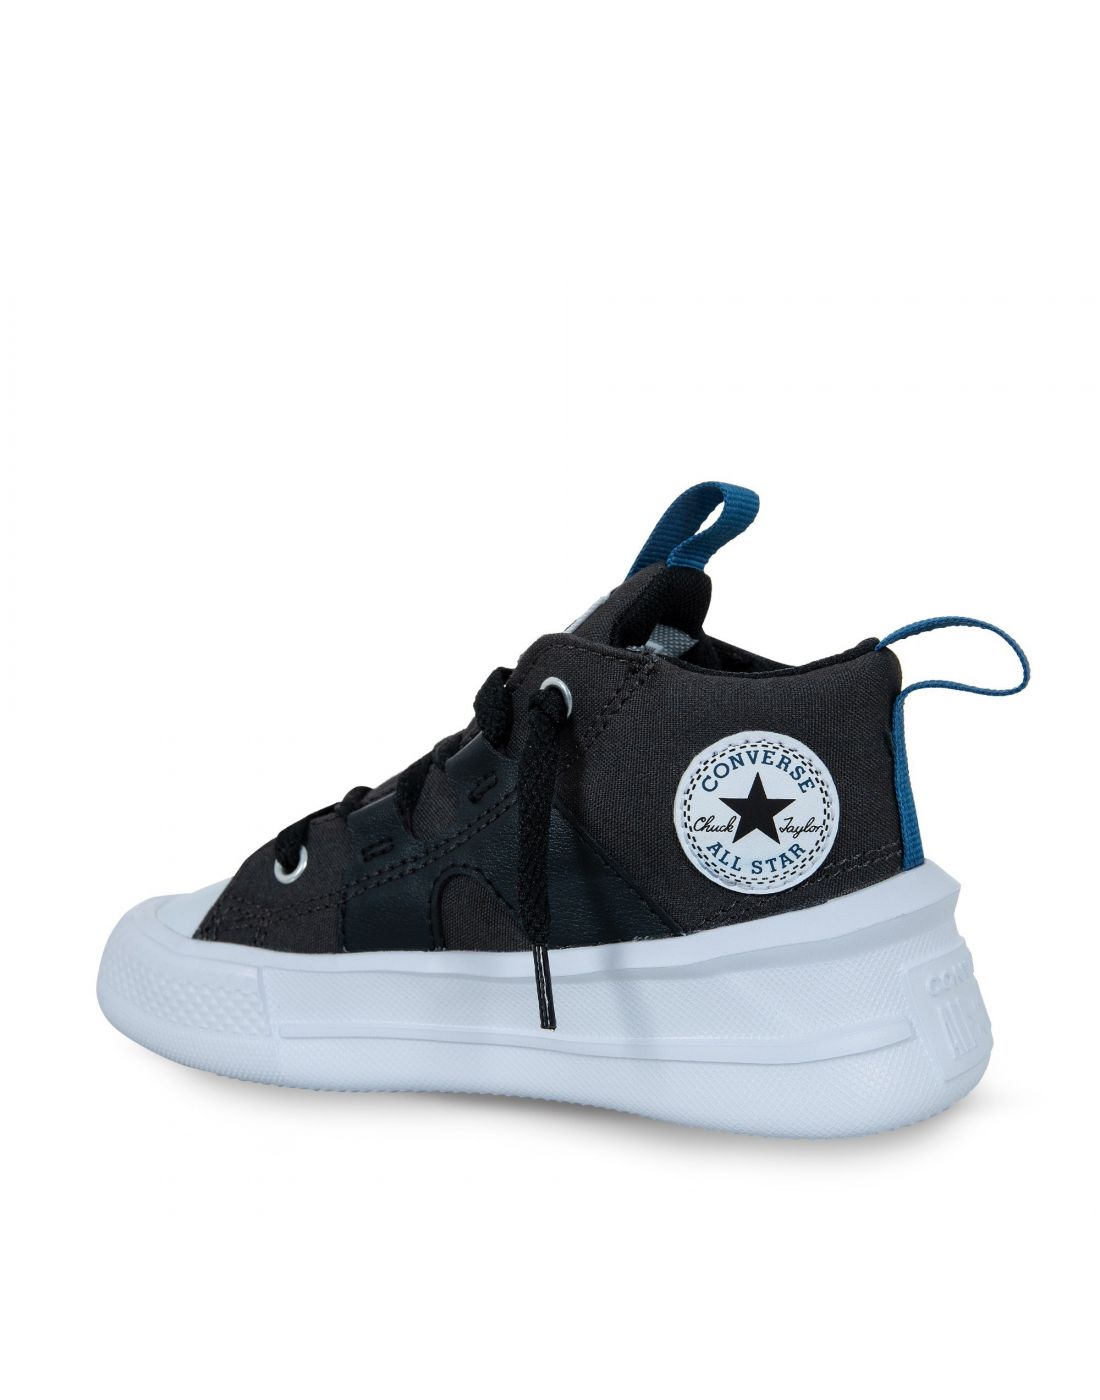  All Star Sneakers Shoes